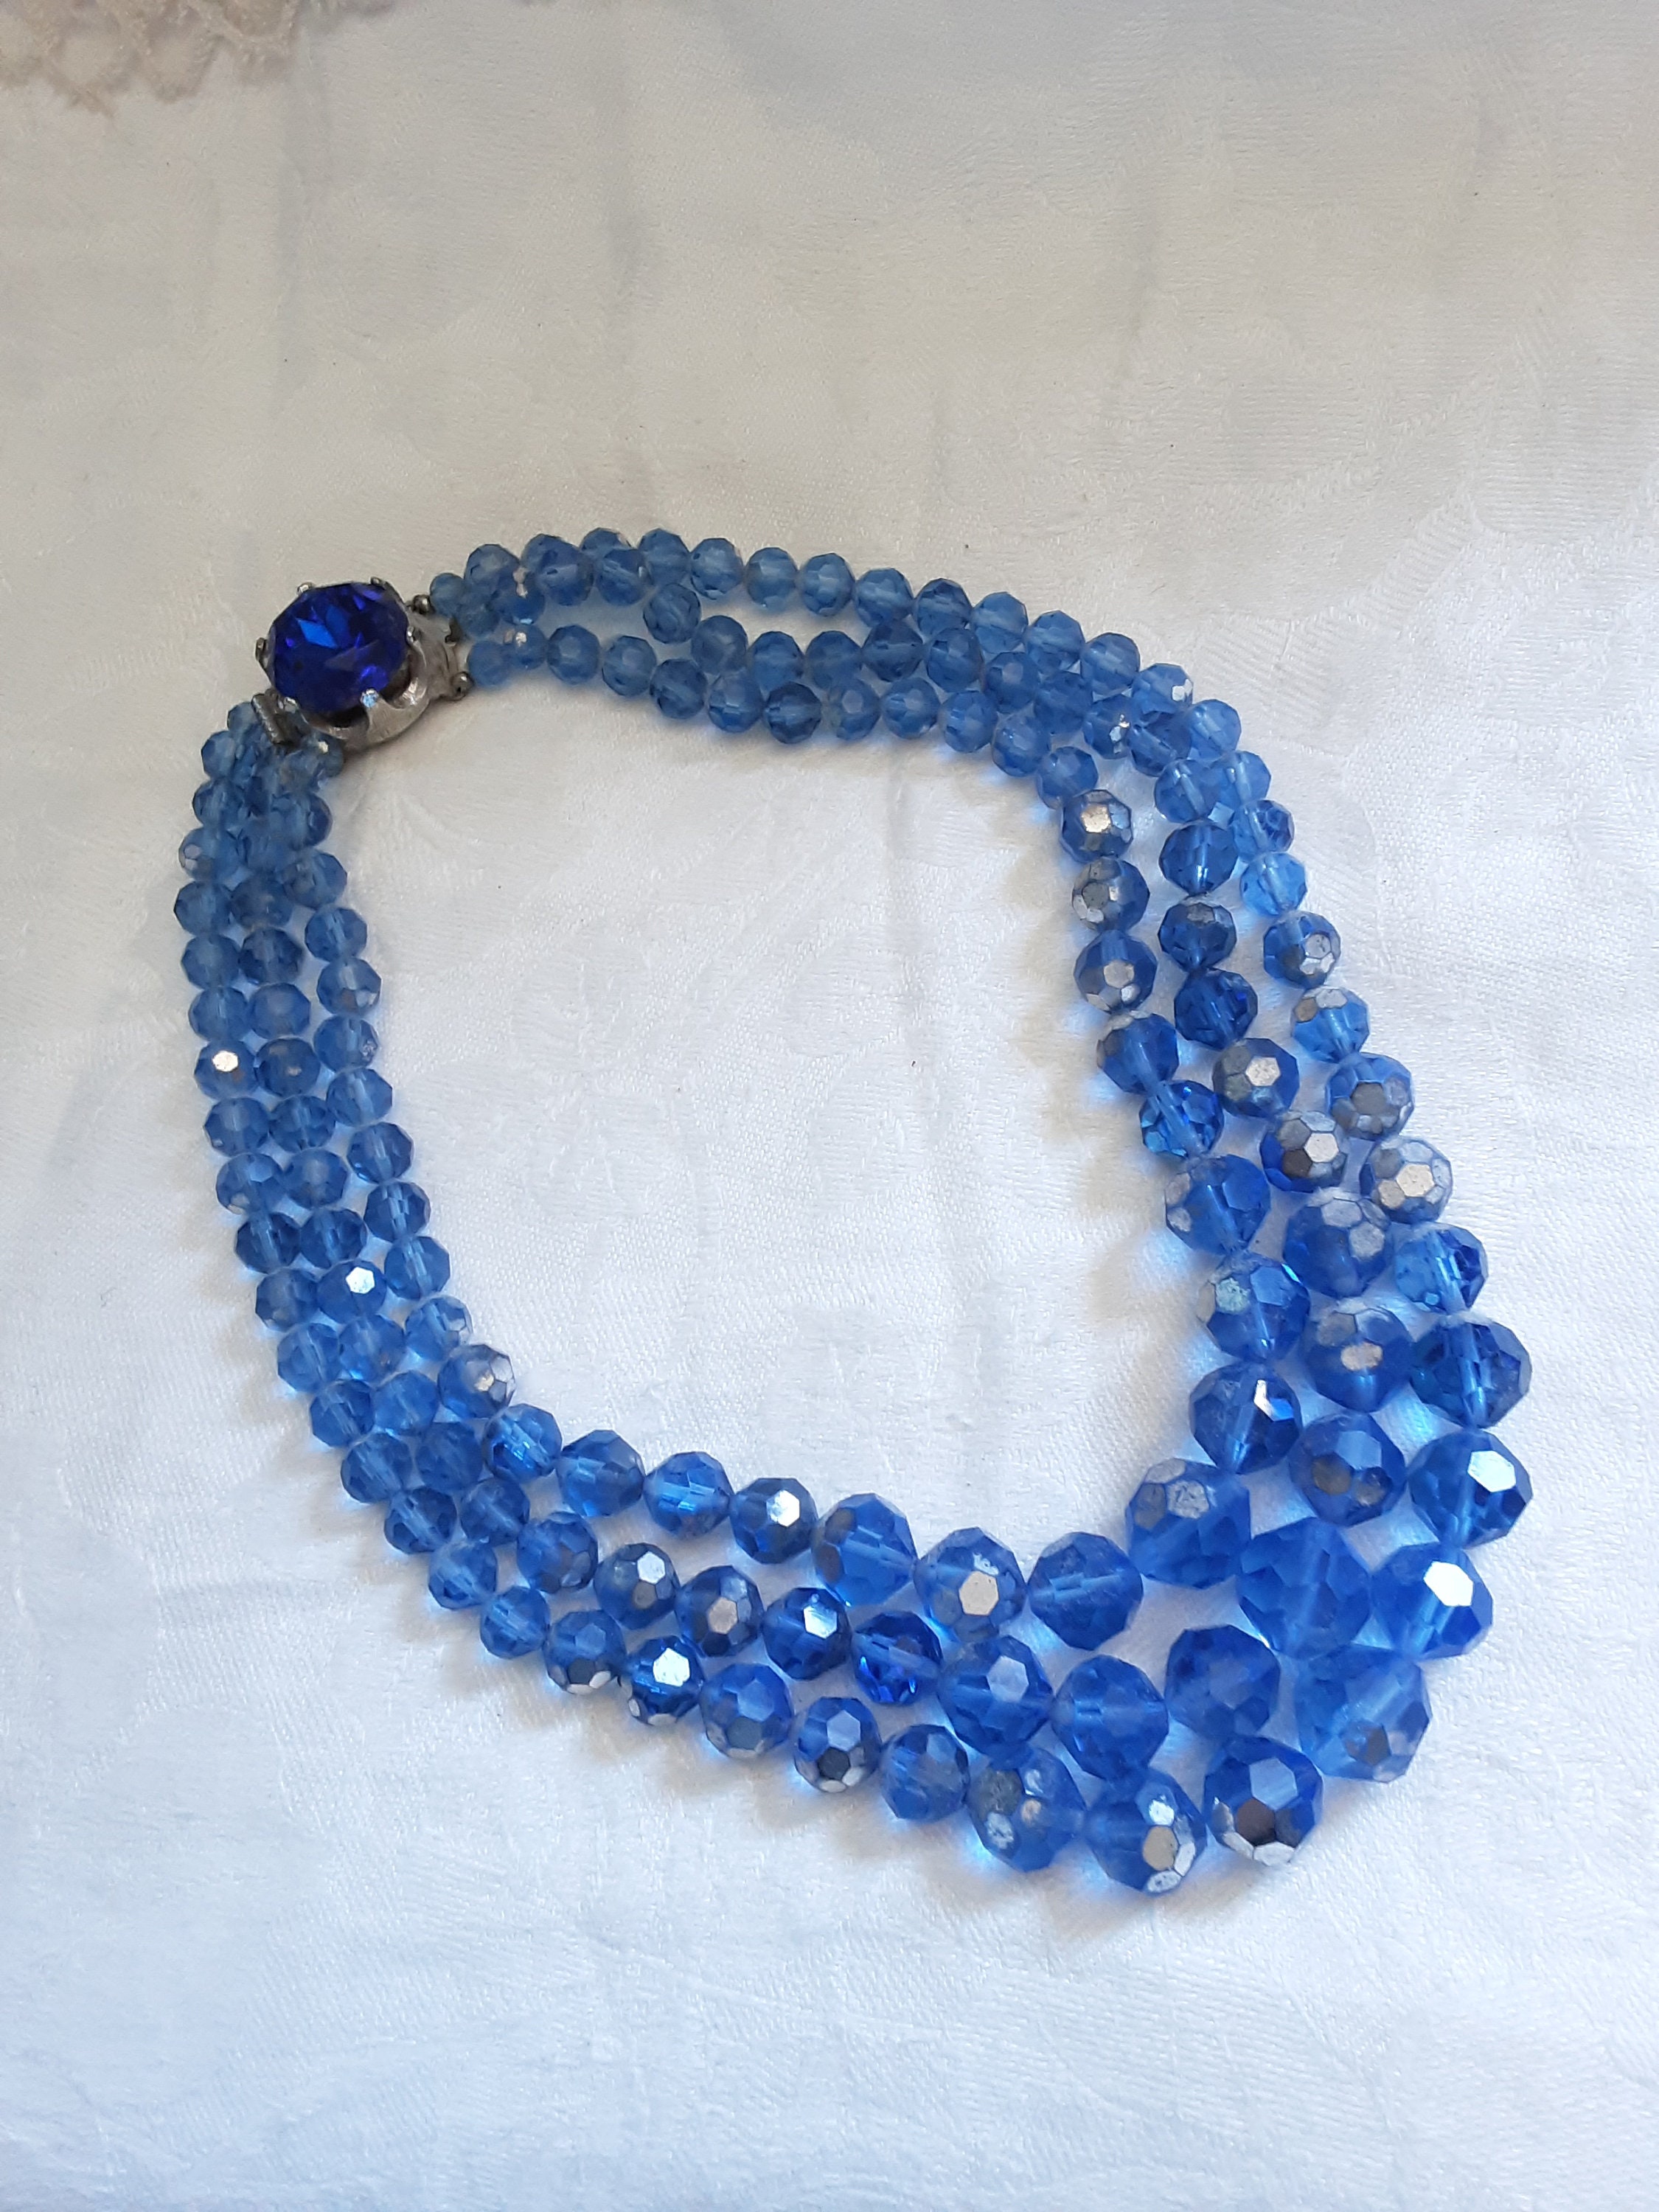 Vibrant Blue rhinestones Necklace / Brooch 2.3x1.5 * Perfect for holiday,  gifts